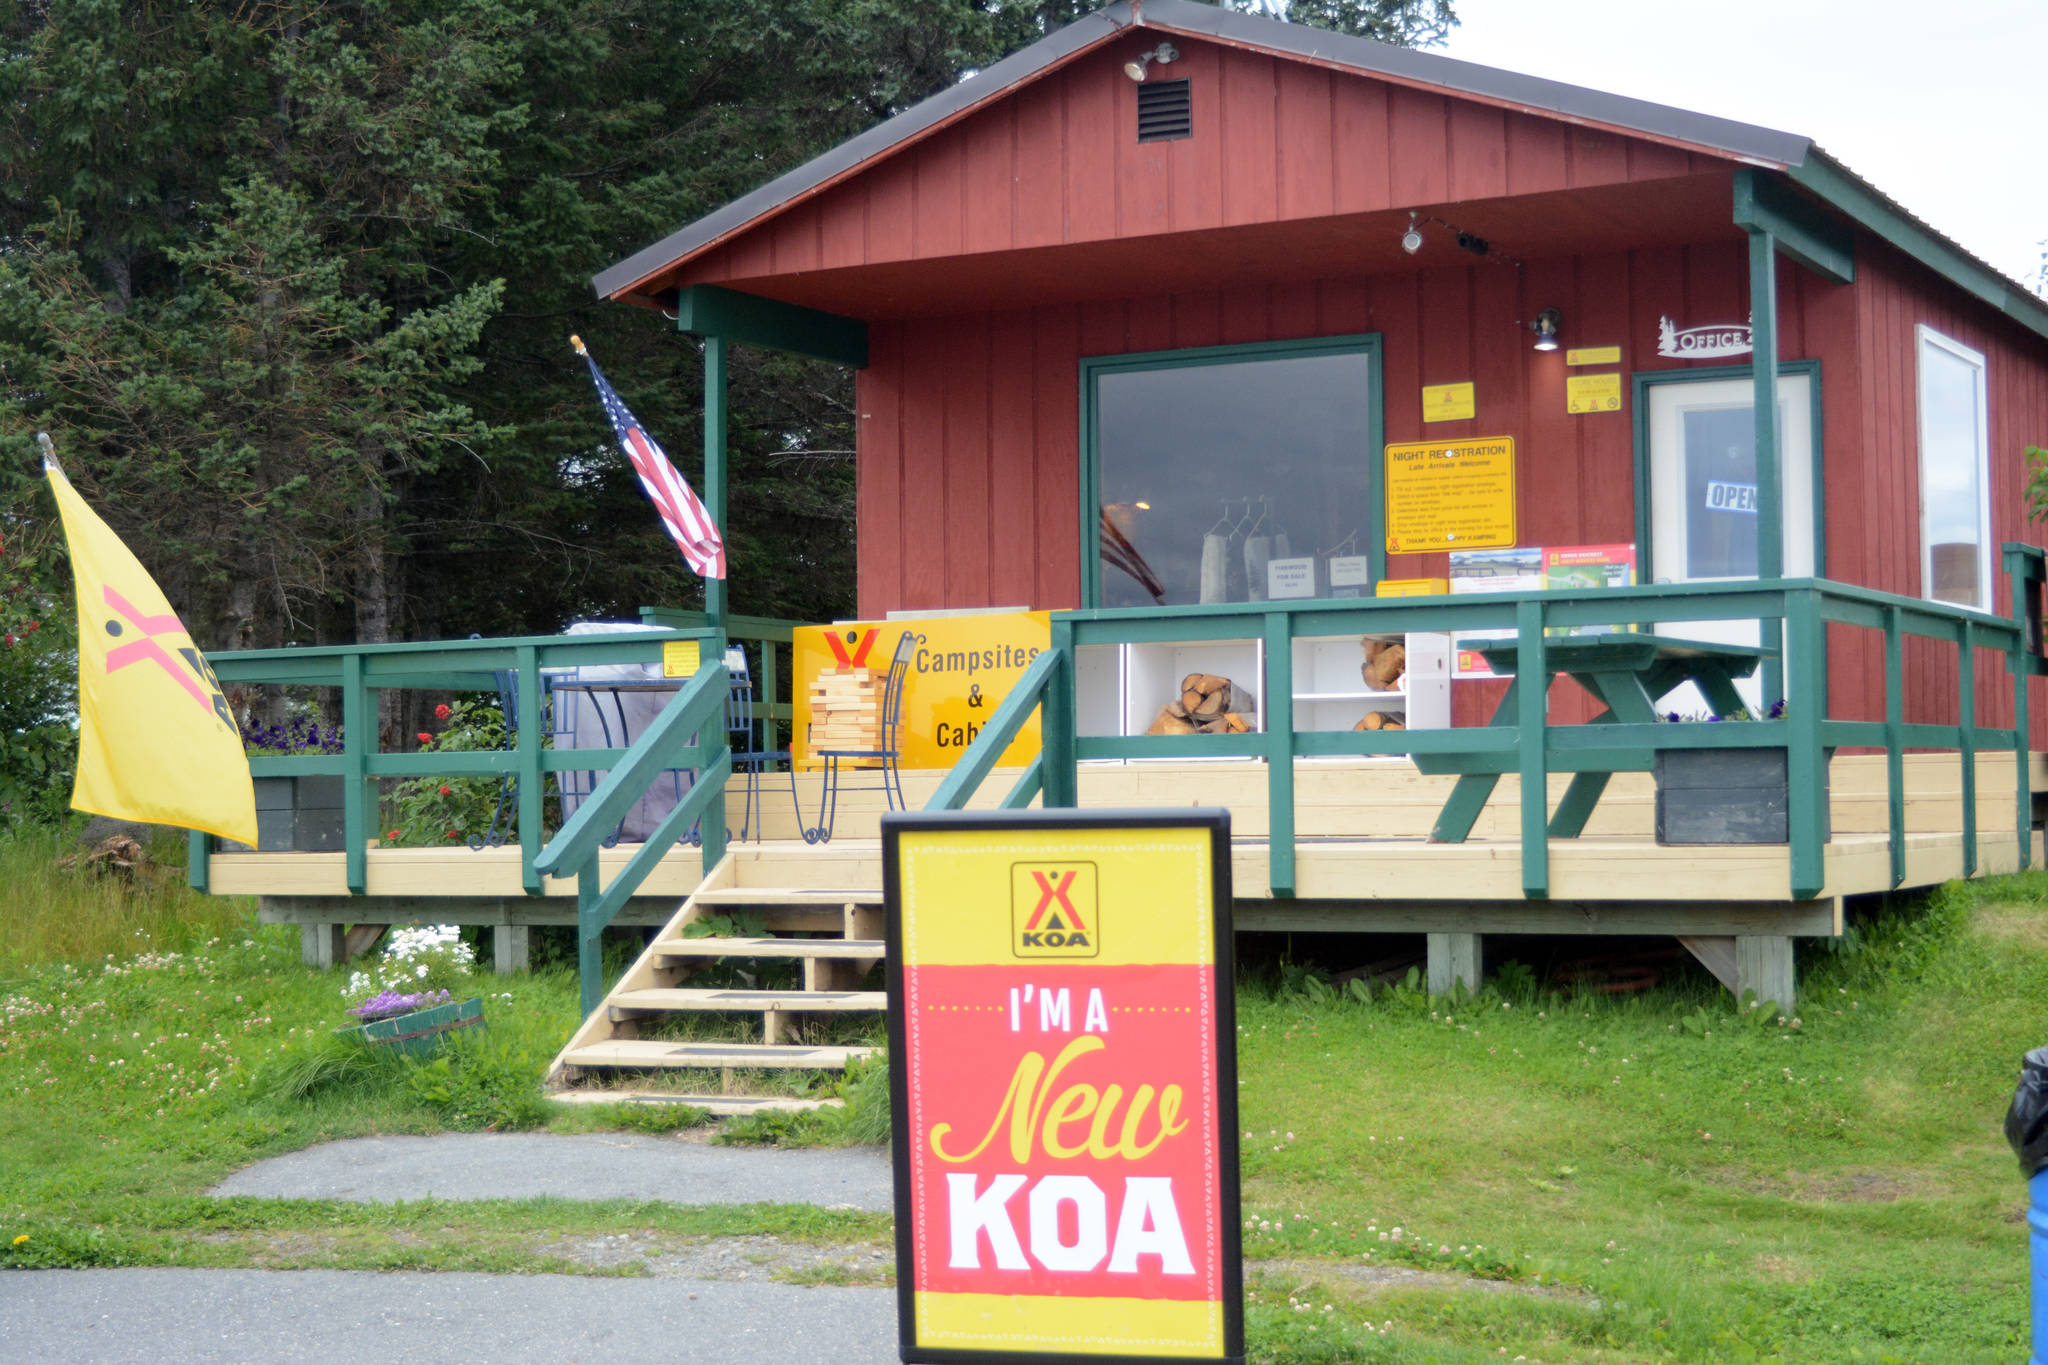 The Homer/Baycrest KOA Campground, as seen on Aug. 18, 2018, near Baycrest Hill in Homer, Alaska. Formerly the Baycrest RV Park, owners Shelly and Jeff Erickson made it a KOA campground in the fall of 2017. (Photo by Michael Armstrong/Homer News)